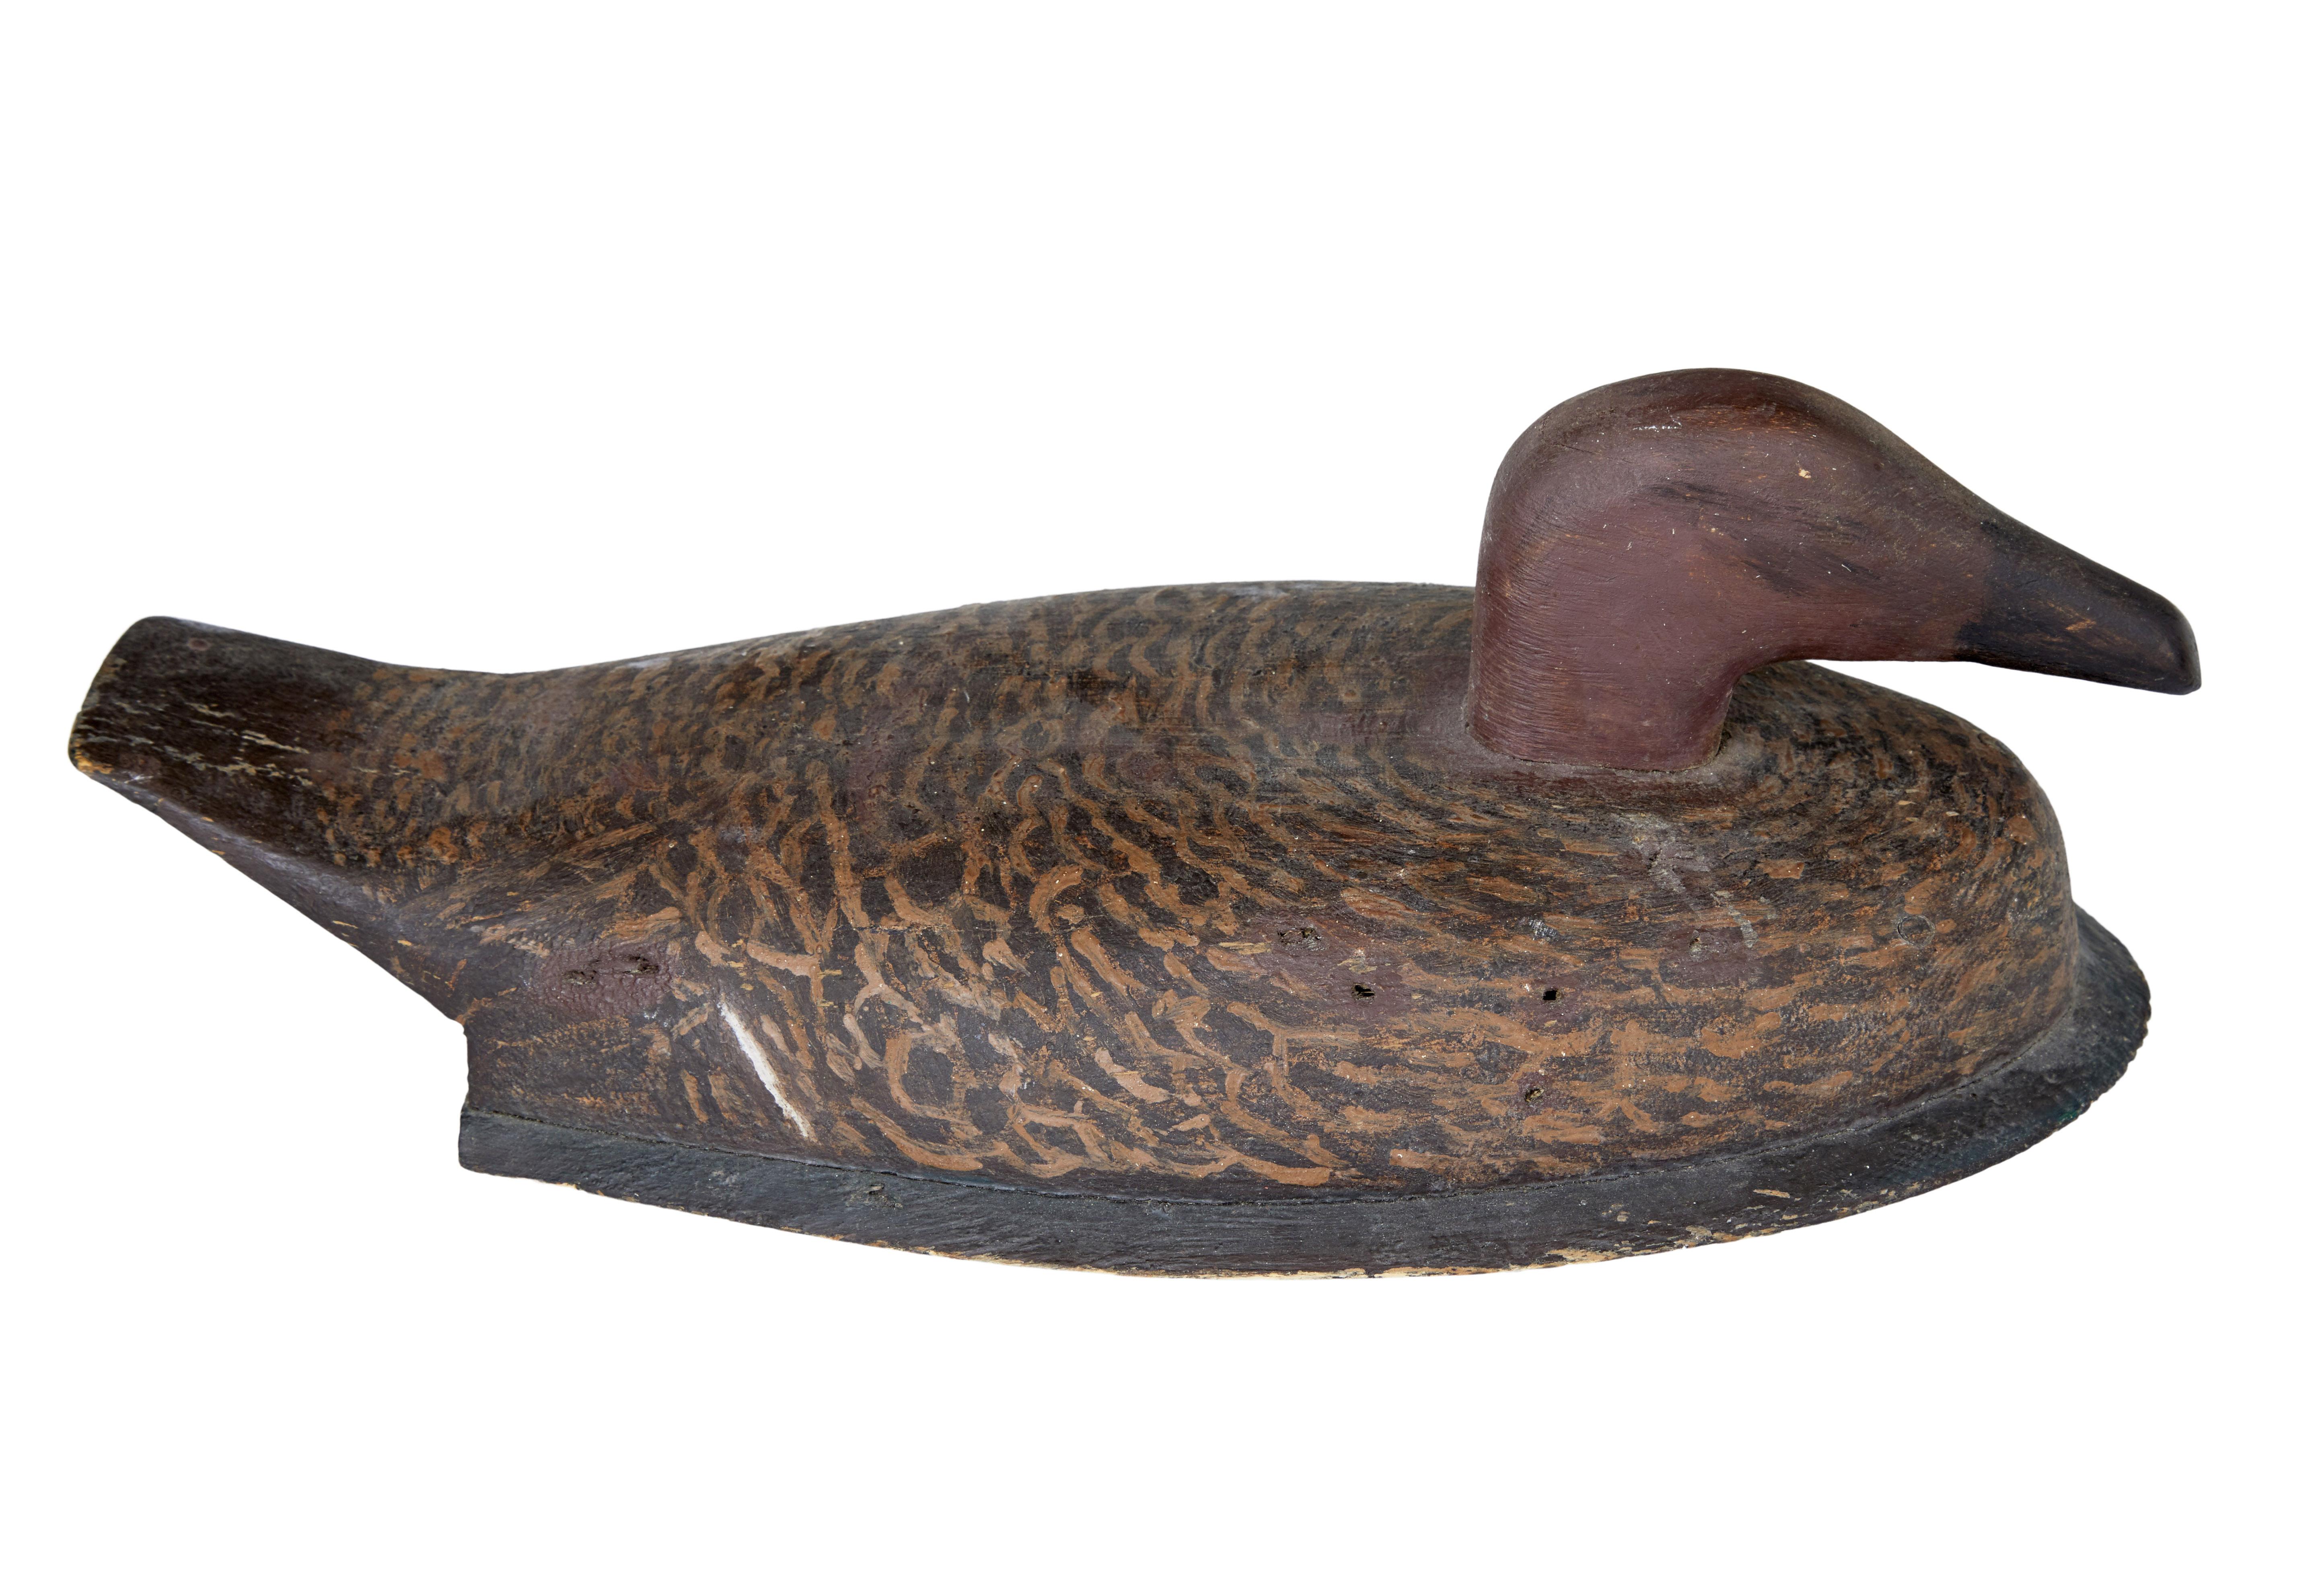 Edwardian Early 20th Century Solid Wood Hand Painted Decoy Duck